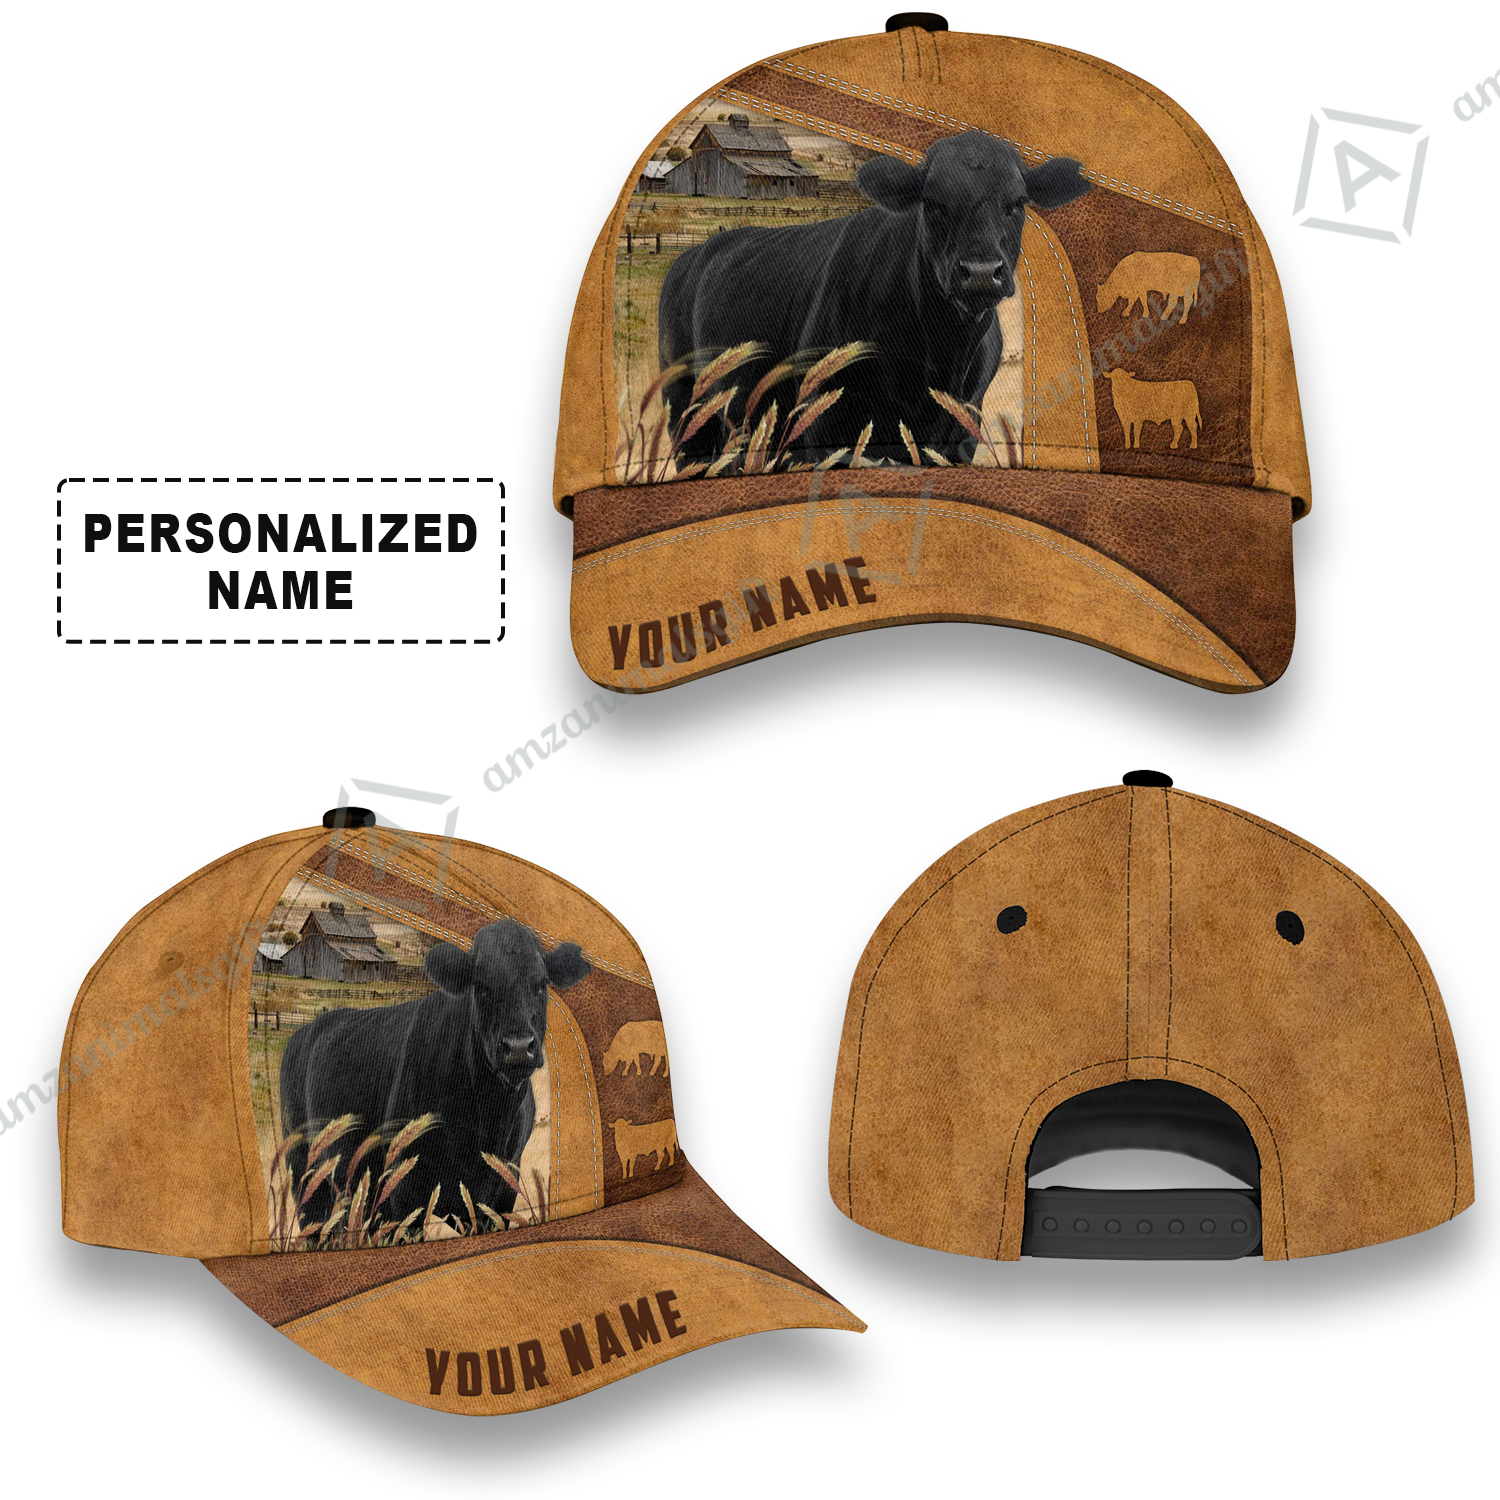 Personalized Name Black Angus Cap, Cattle Farm Brown Leather Pattern Custom Hats For Friend, Family, Farmers, Black Angus Lovers